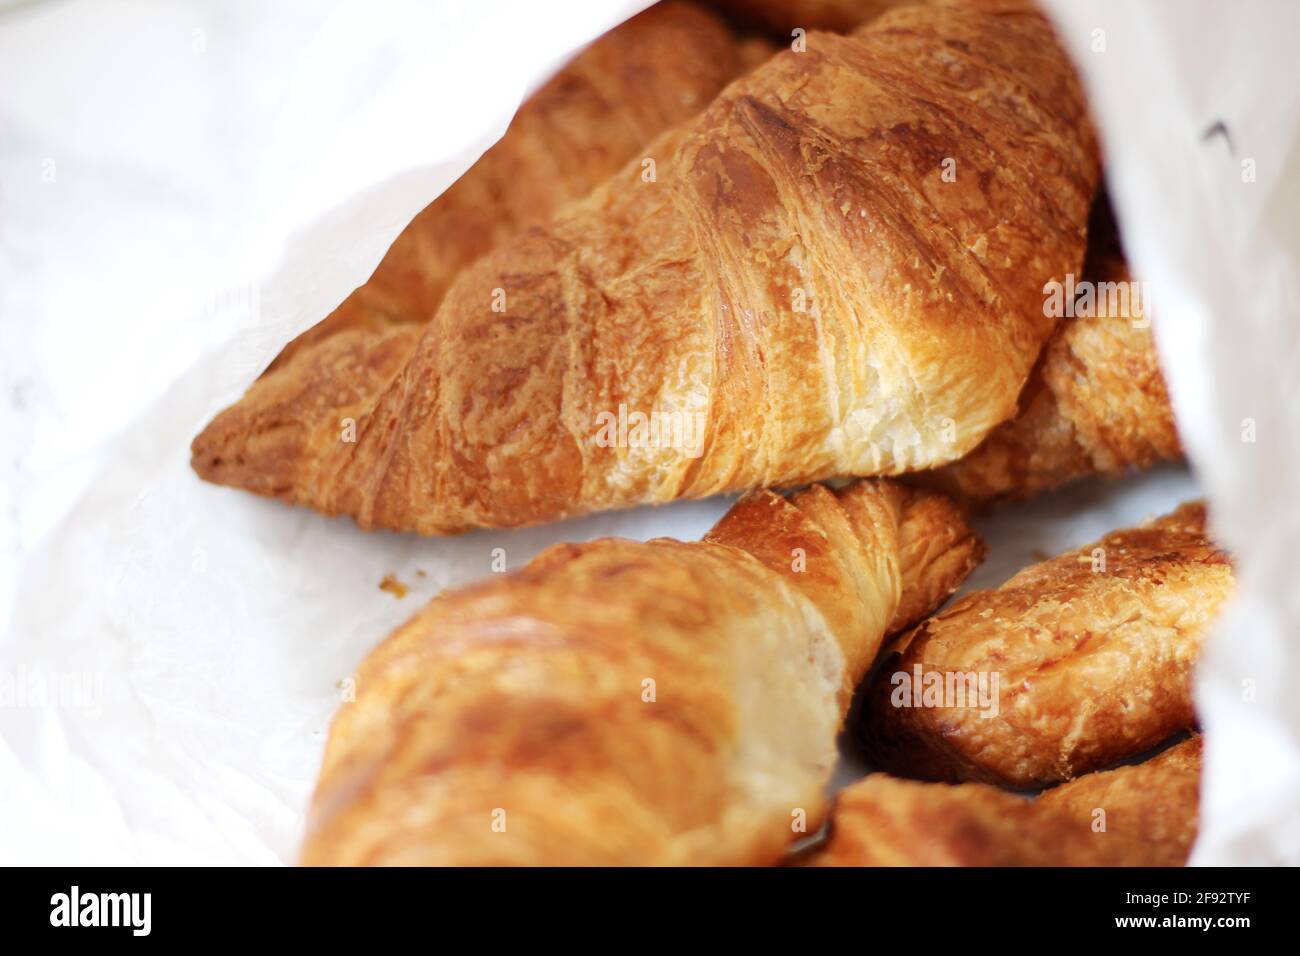 Freshly Baked Croissants from Parisian Bakery. Traditional French Breakfast Pastries. Artisanal Bakery in Paris, France. Stock Photo